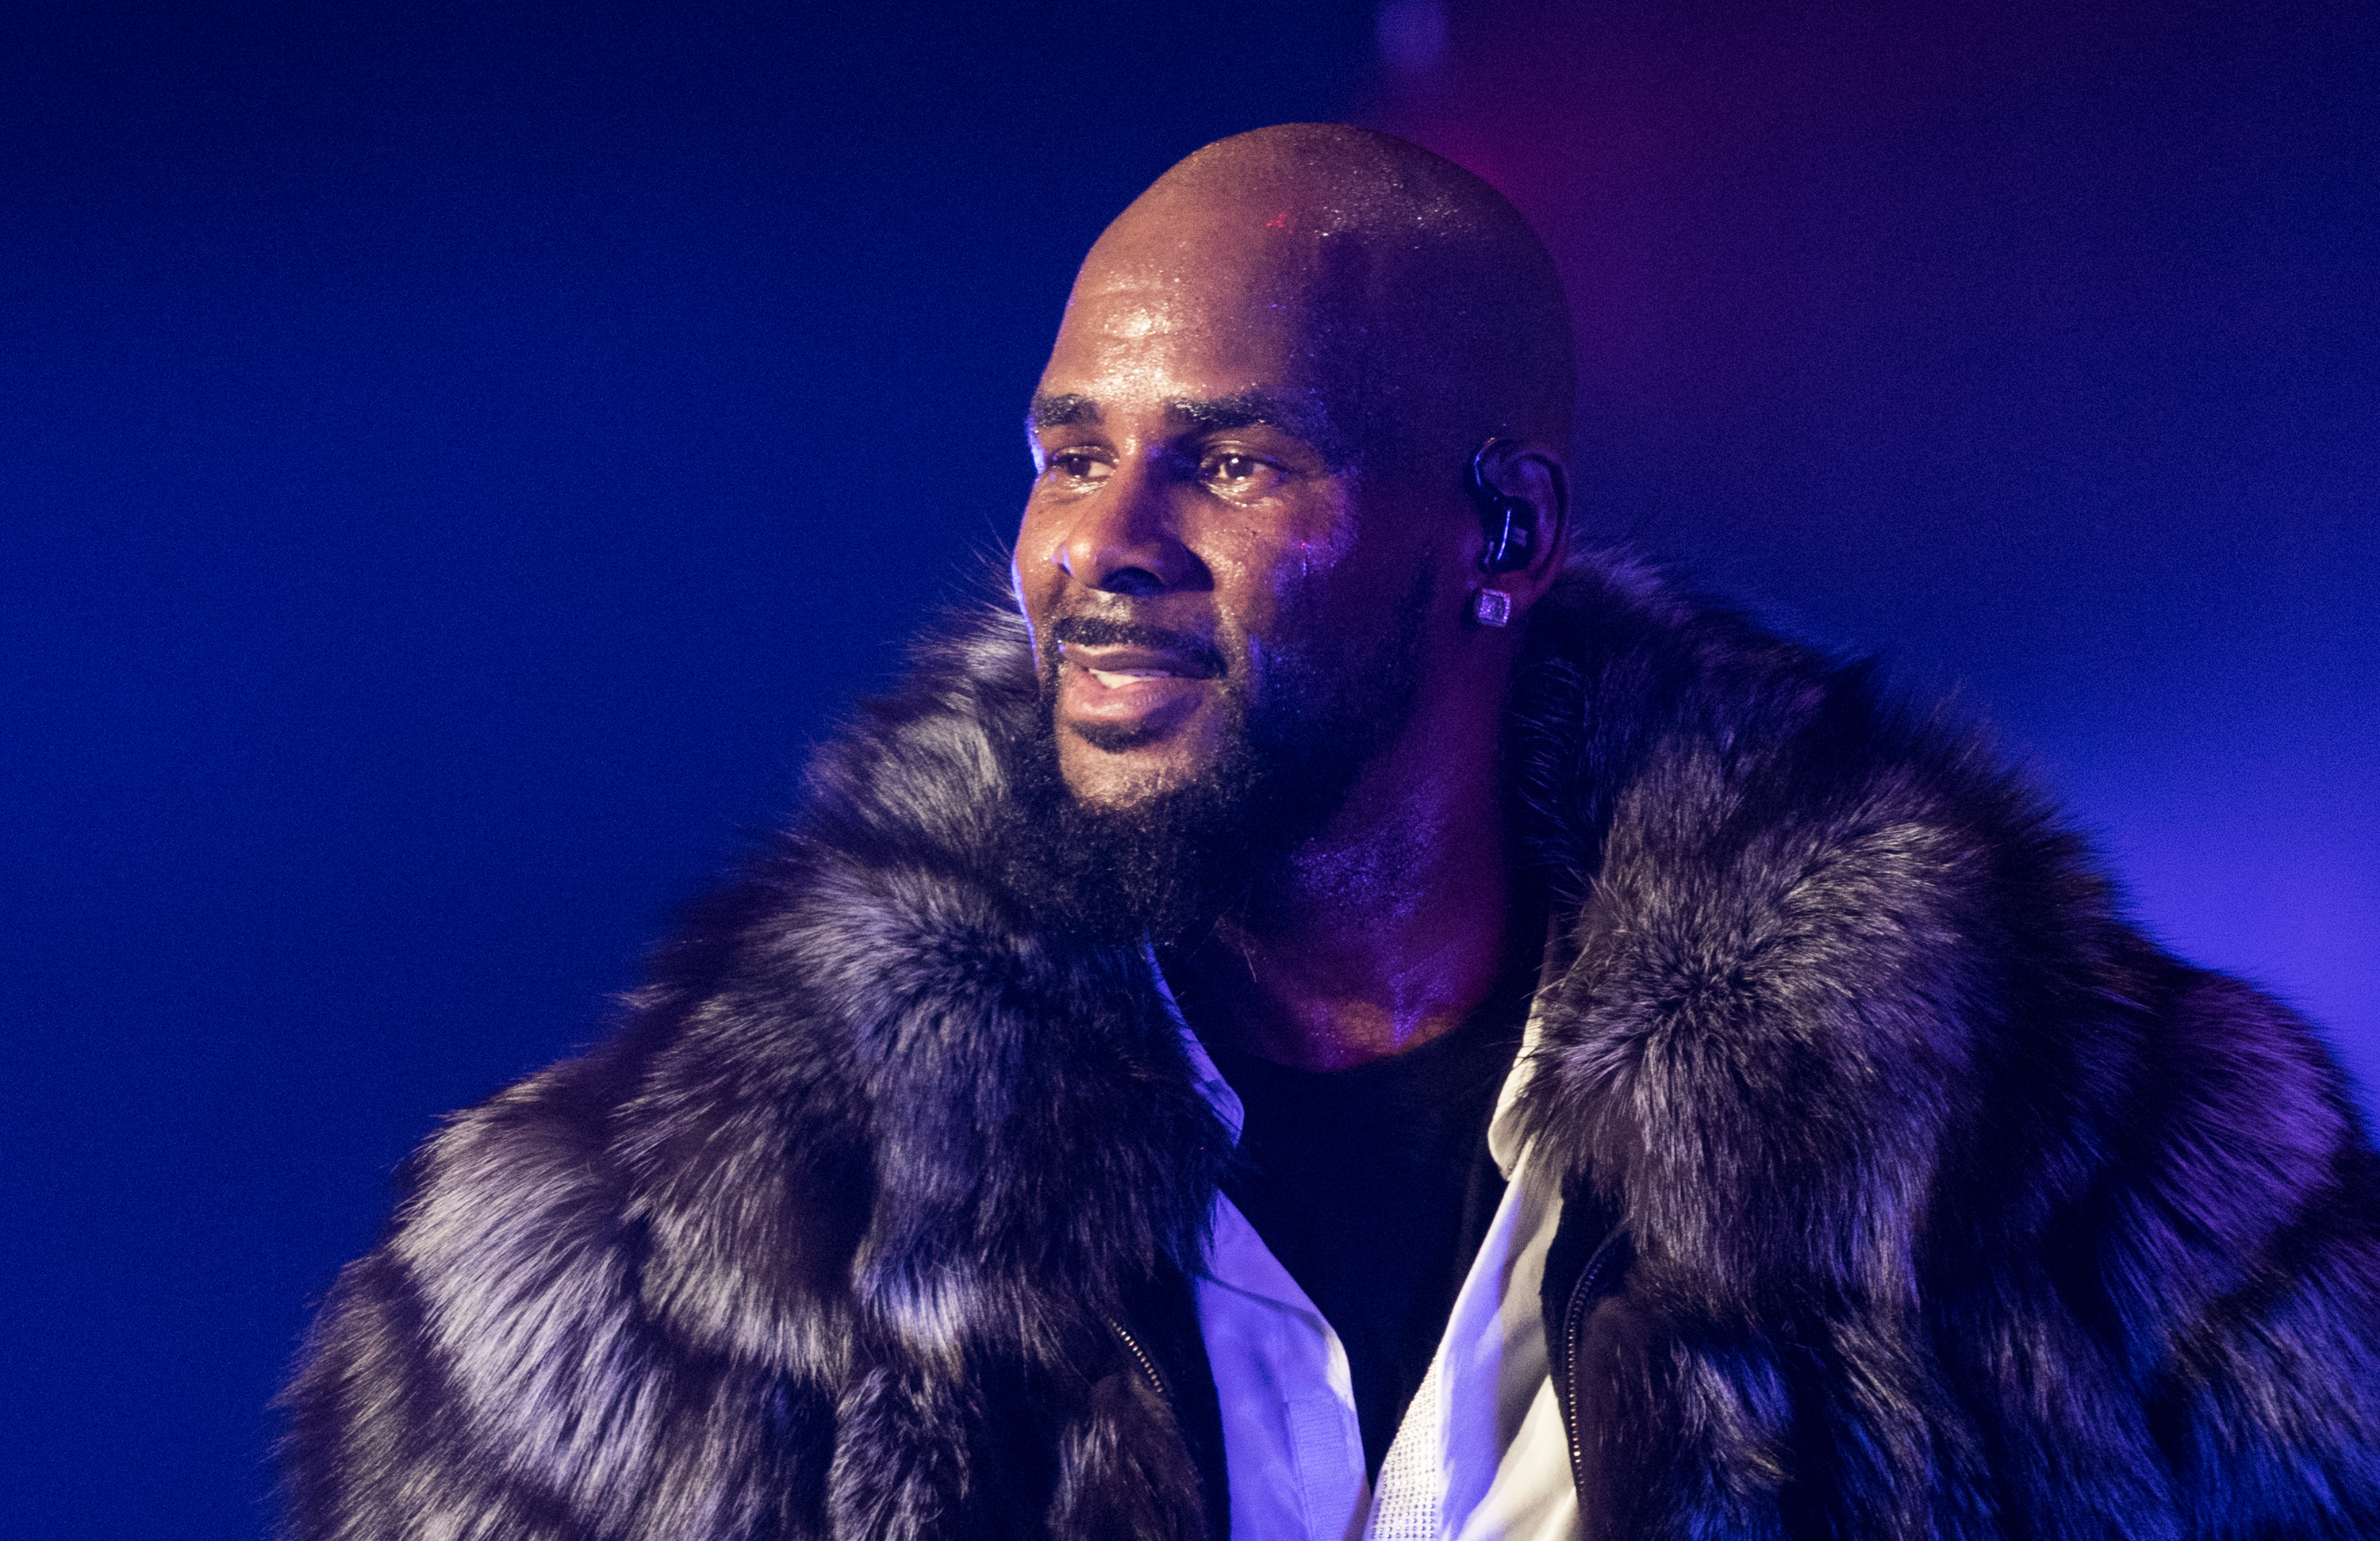 R. Kelly performing during the "12 Nights of Christmas" tour on December 17, 2016, in New York City. | Source: Getty Images